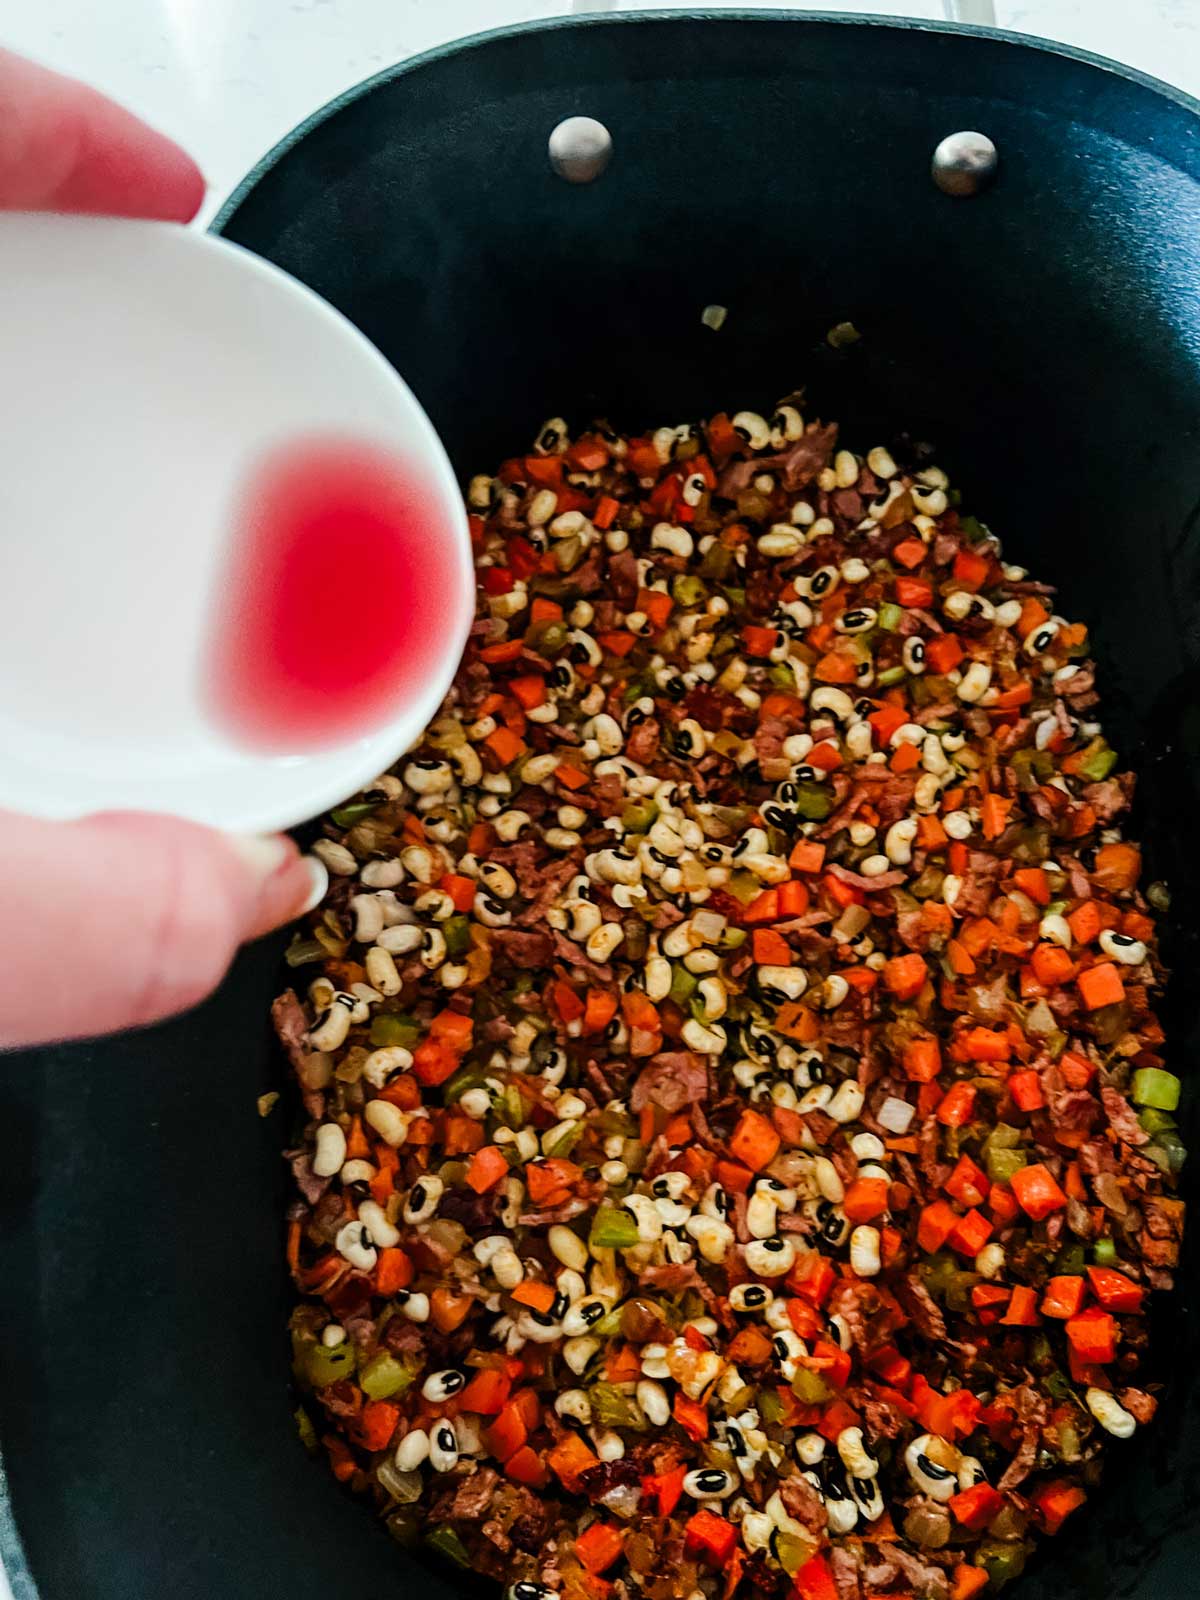 Vinegar being added to a slow cooker with black eyed peas and seasonings.